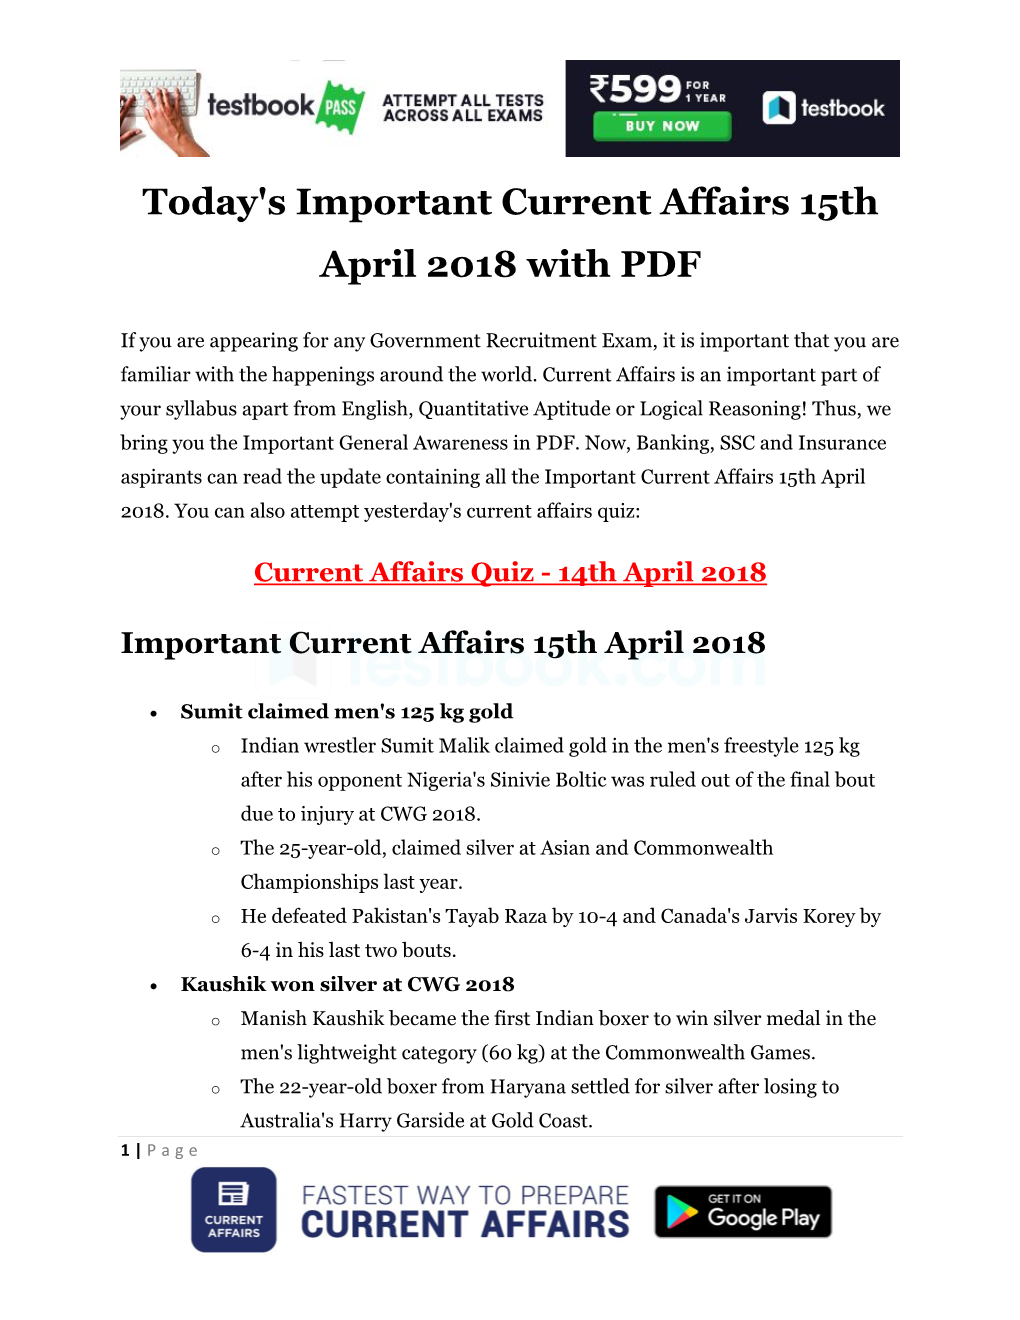 Today's Important Current Affairs 15Th April 2018 with PDF